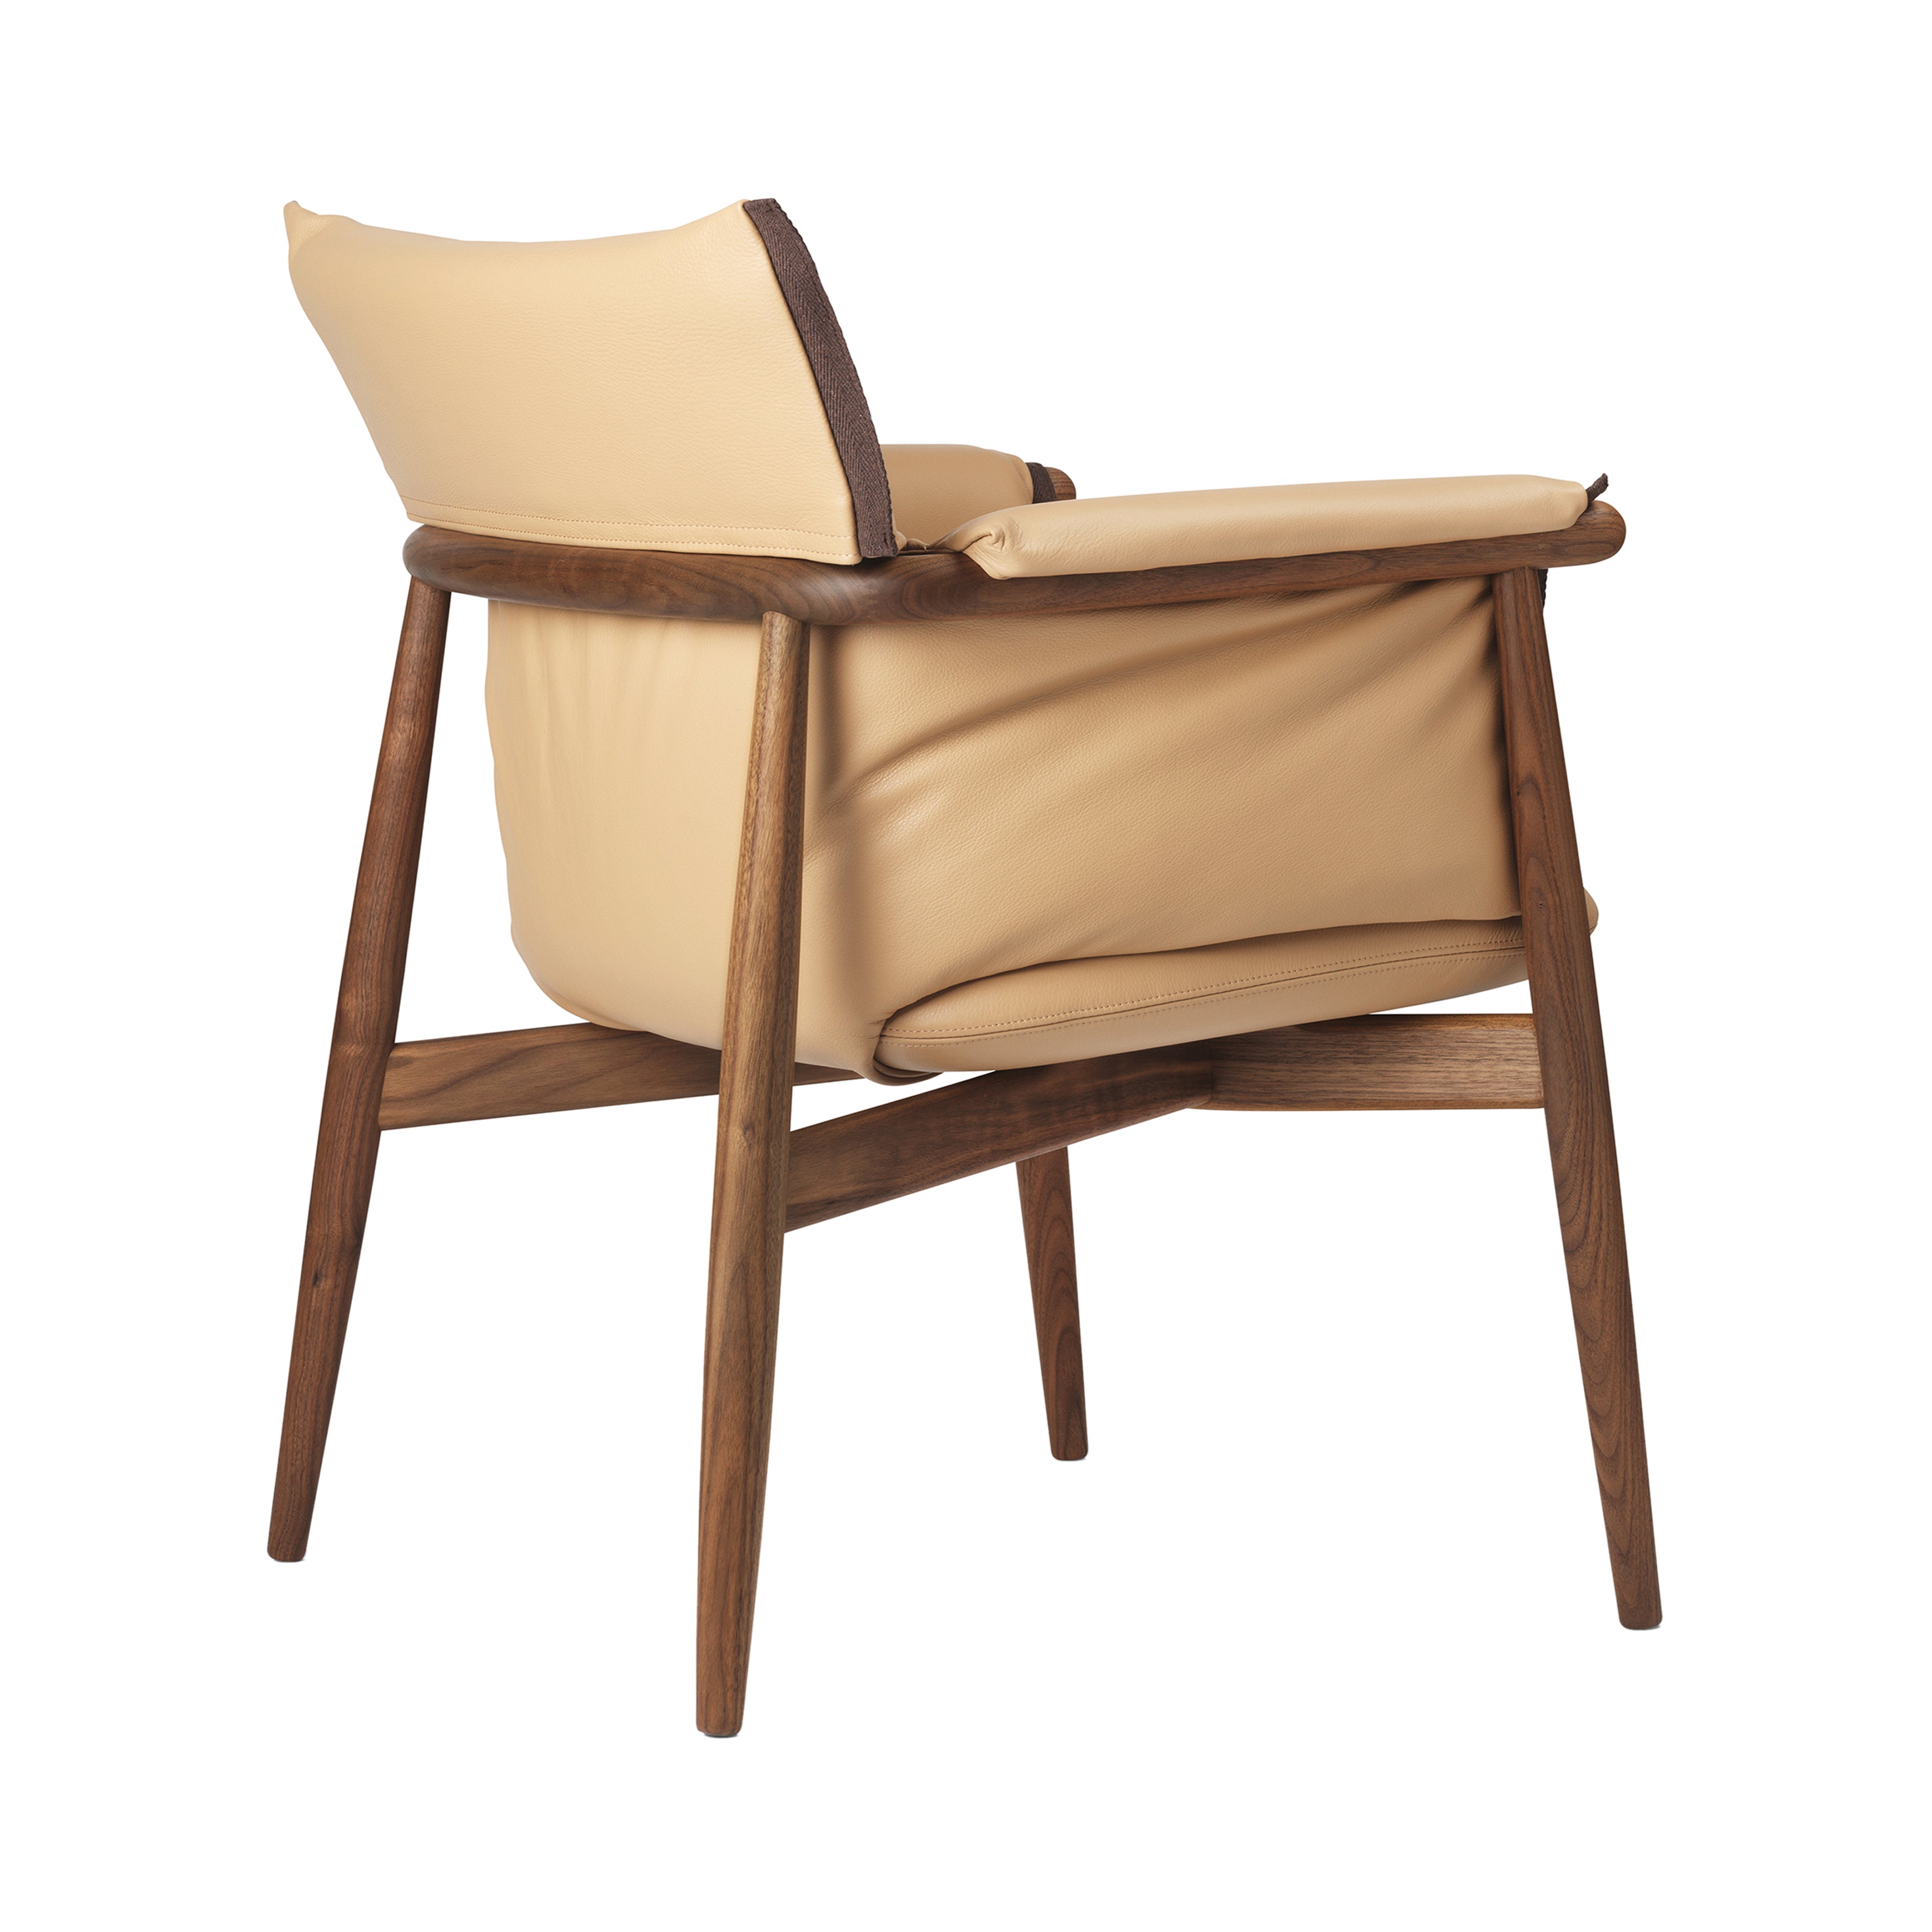 E015 Embrace Lounge Chair: Brown Edging Strip + Oiled Walnut